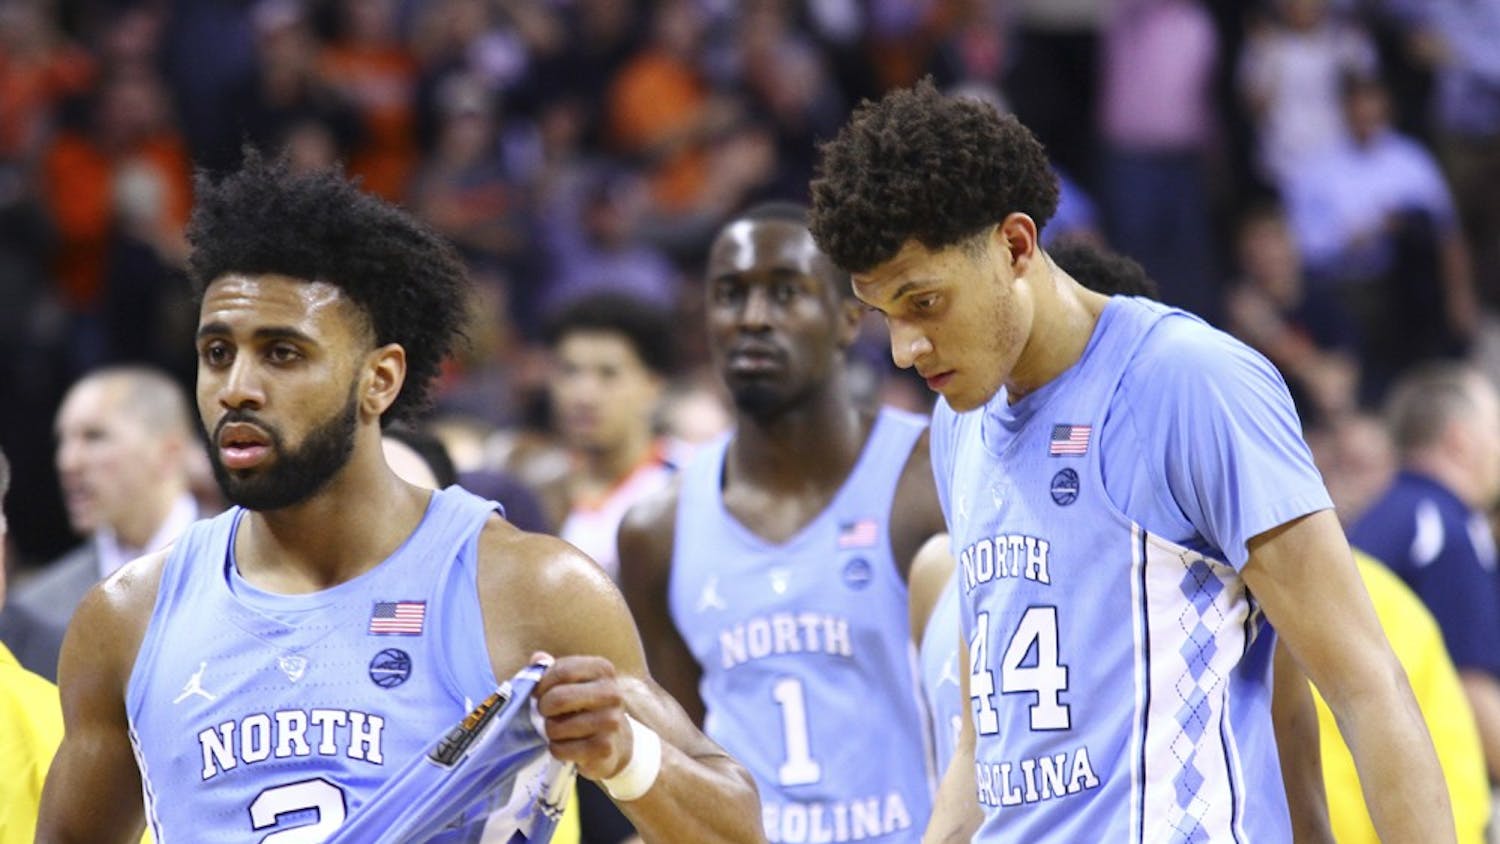 North Carolina guard Joel Berry (2) and wings Justin Jackson (44) and Theo Pinson (1) walk back to the locker room after losing to Virginia on the road on February 27th.